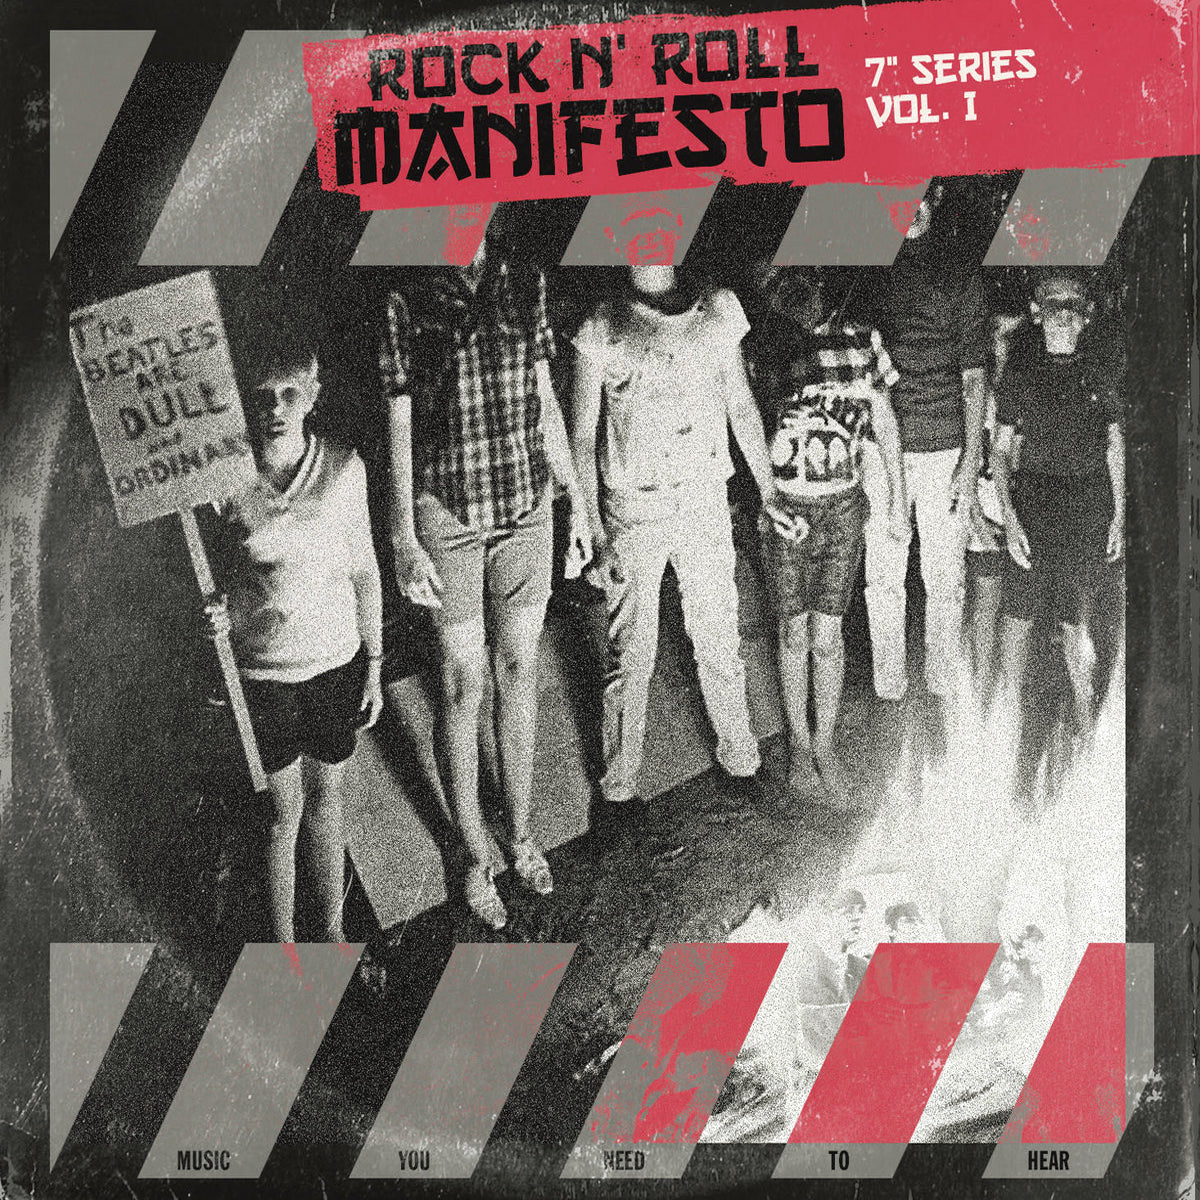 V/A- Rock 'n Roll Manifesto 7" Series Vol. 1 7" ~W/ TIGER TOUCH, MISSILE STUDS + RARE BLOOD RED WAX!